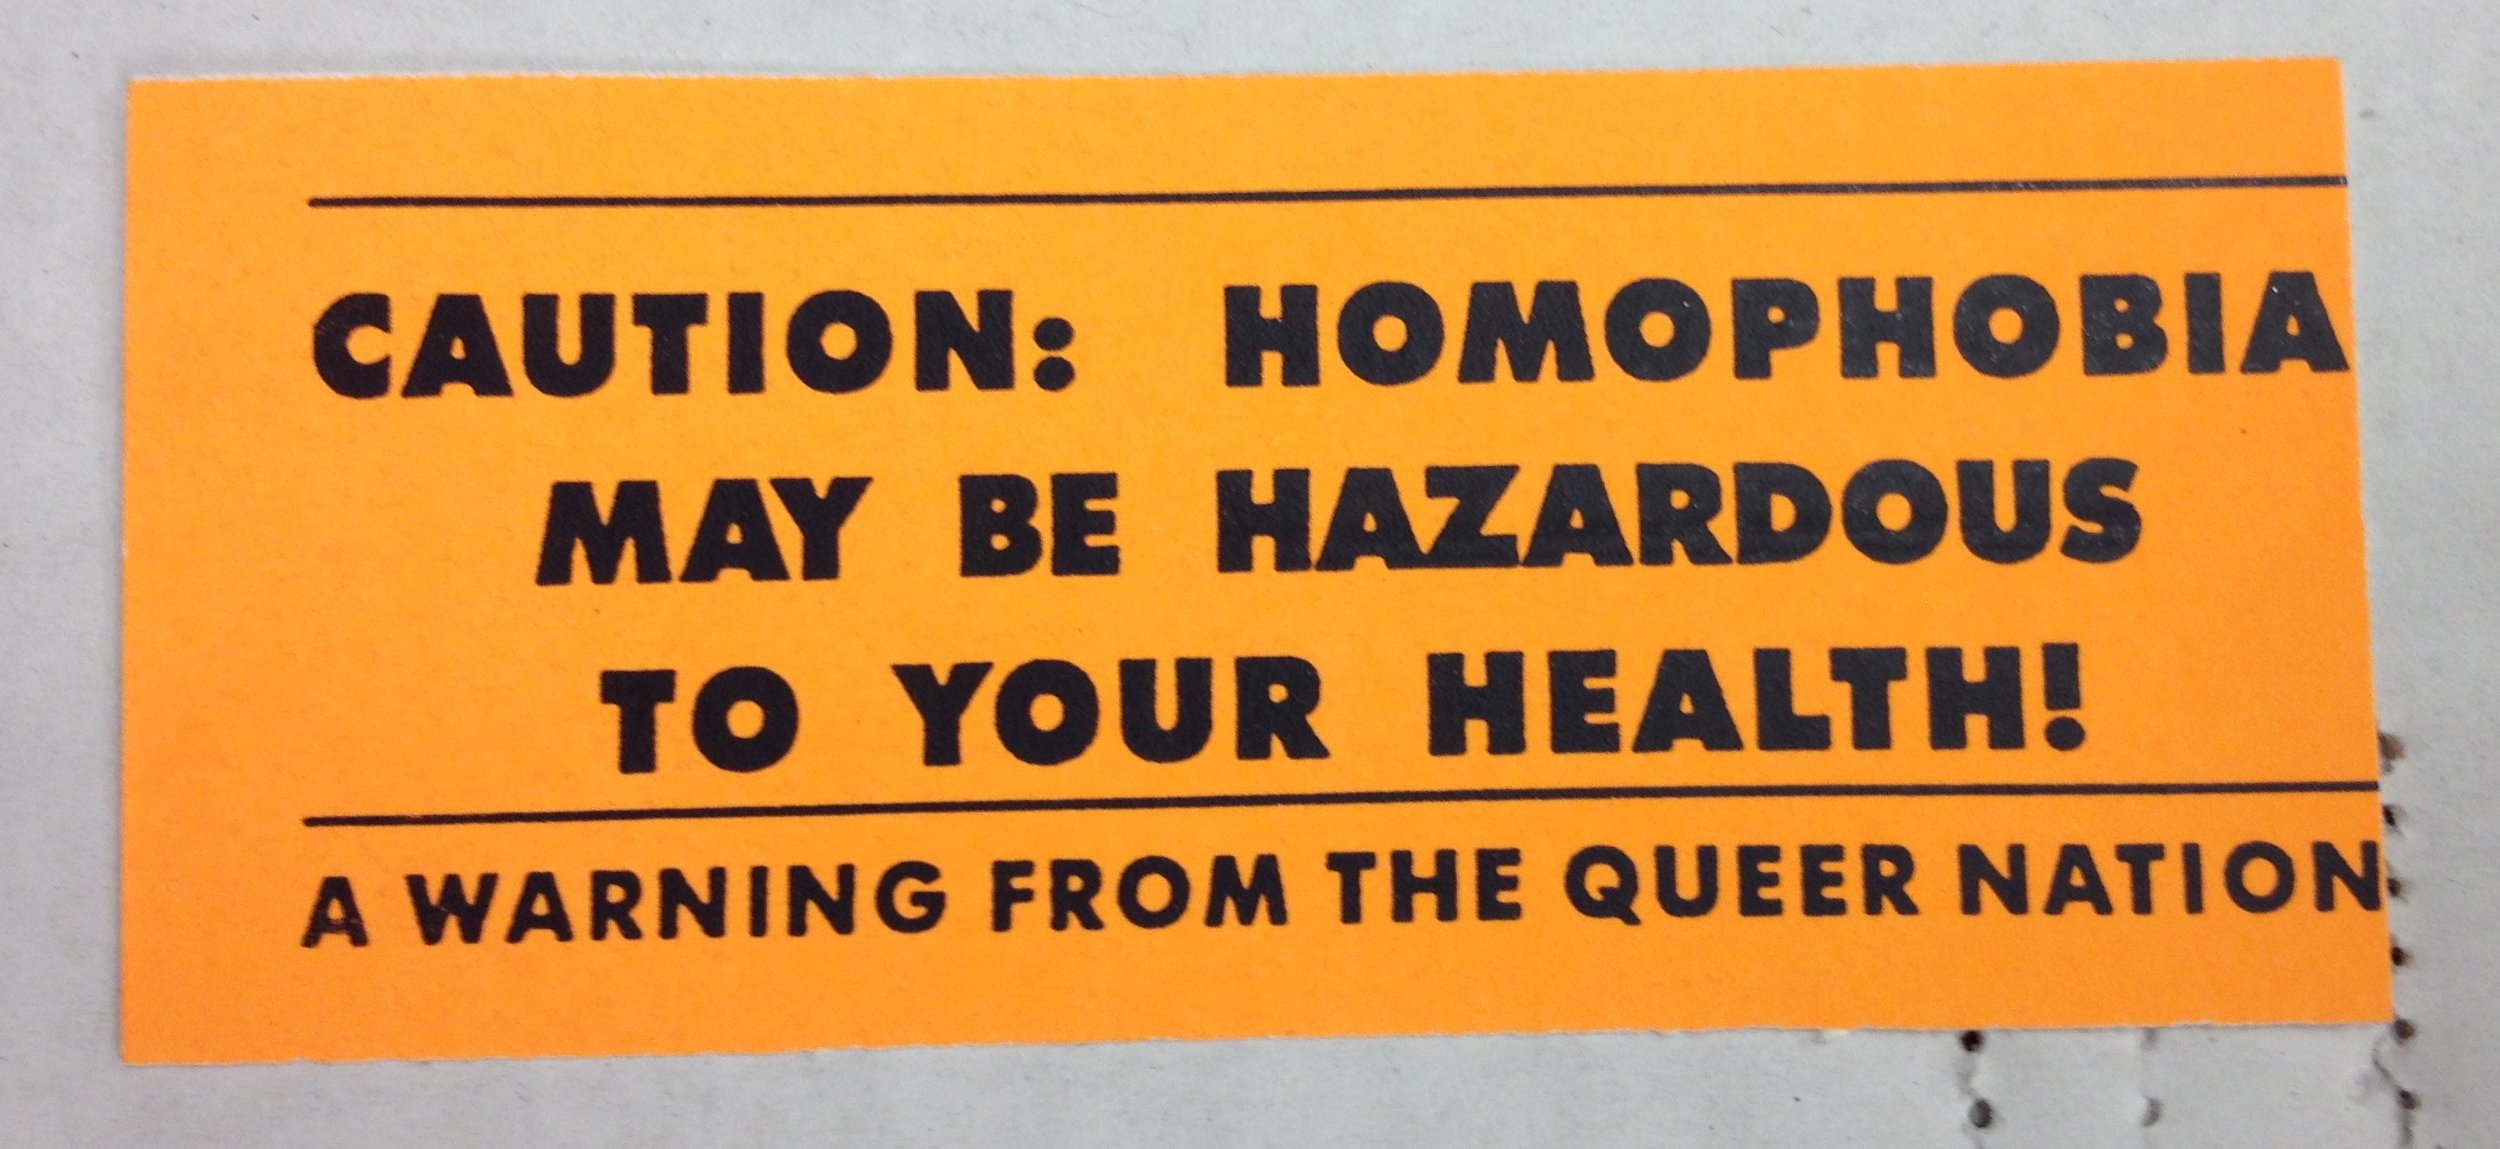 Caution: Homophobia May Be Hazardous To Your Health